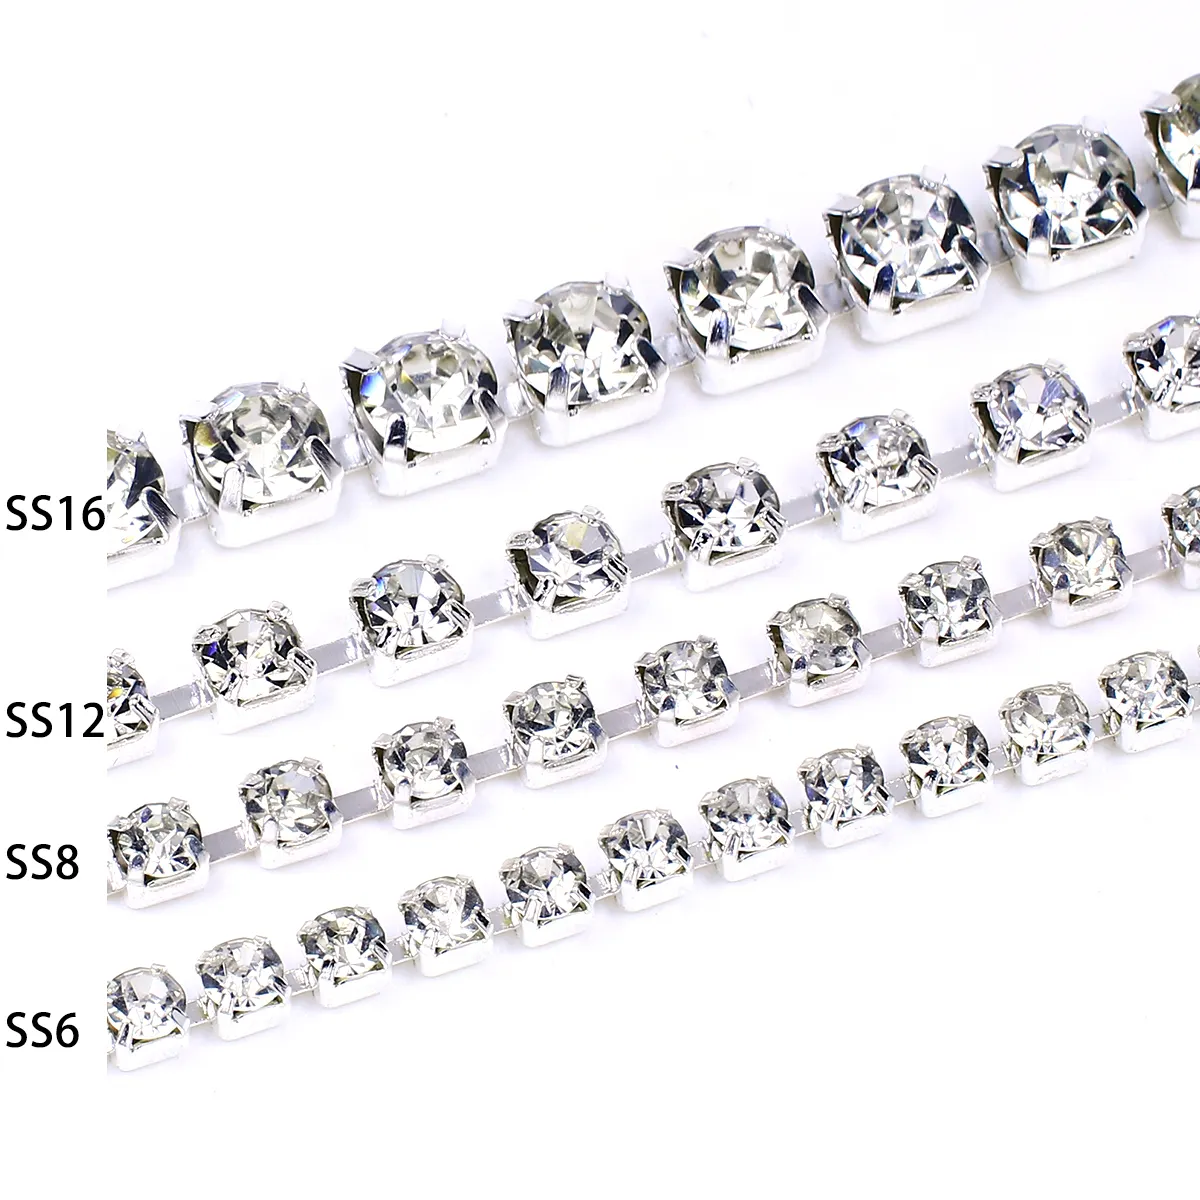 SS6 Crystal cupchain solid back Square base 4 leg claw Rhinestone Cupchain Trimming strass for Clothes Dresses